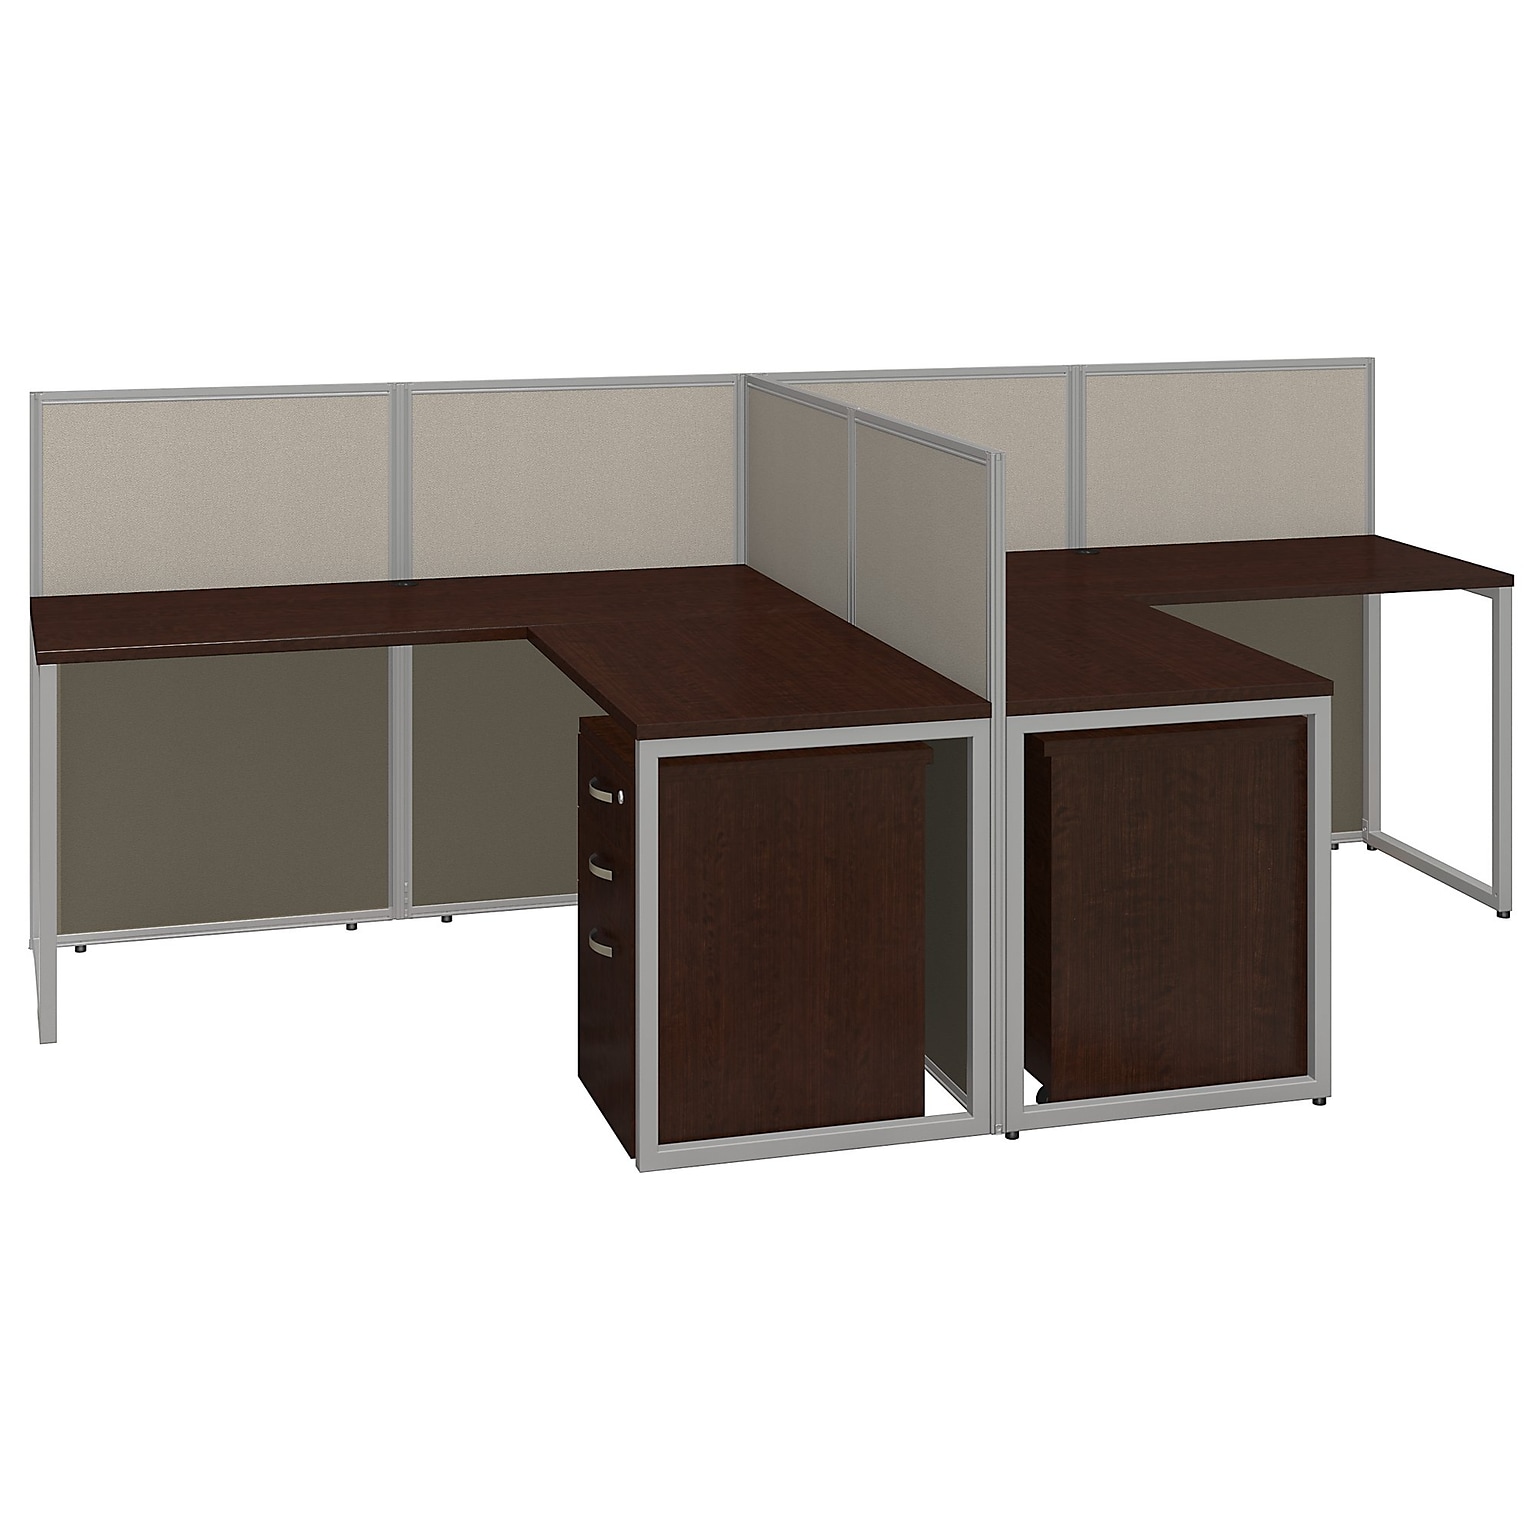 Bush Business Furniture Easy Office 44.88H x 60.03W 2 Person T-Shaped Cubicle Workstation, Dark Wood (EOD560SMR-03K)